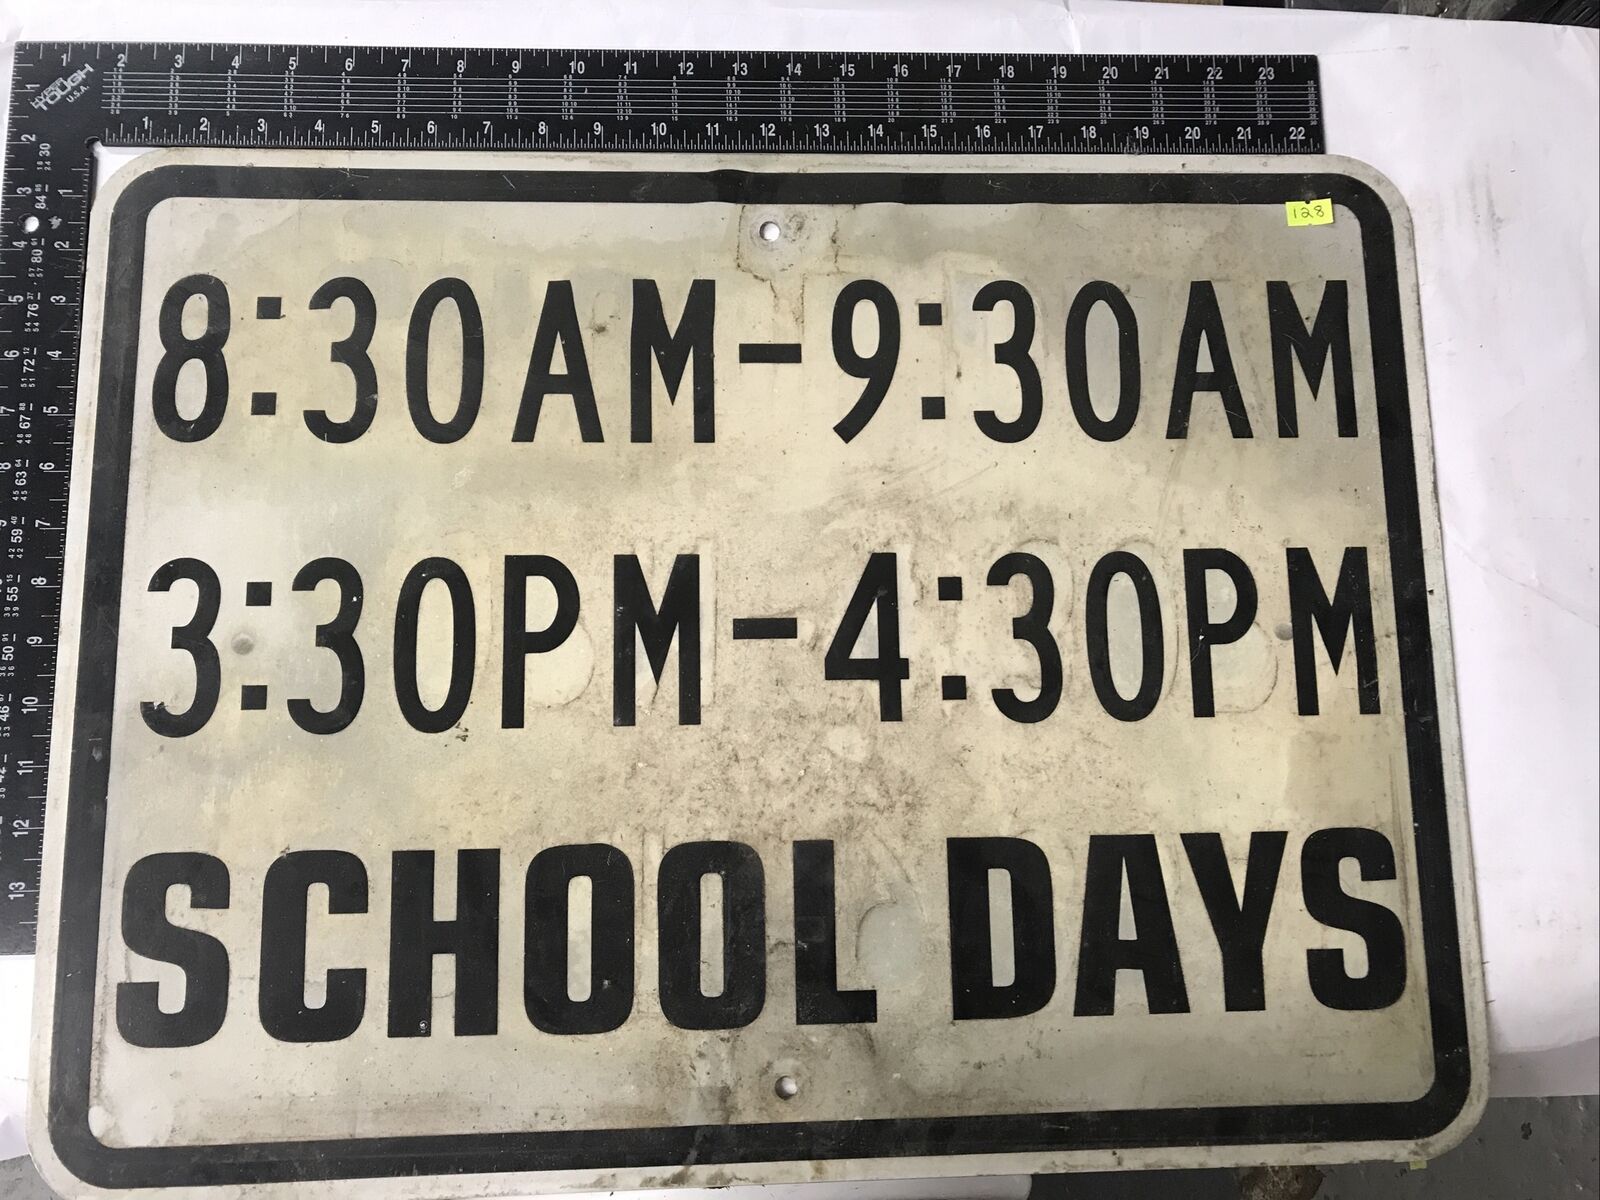 8:30am-9:30am 3:30pm-4:30pm School Days Highway Street Road Sign 18”x24” Used